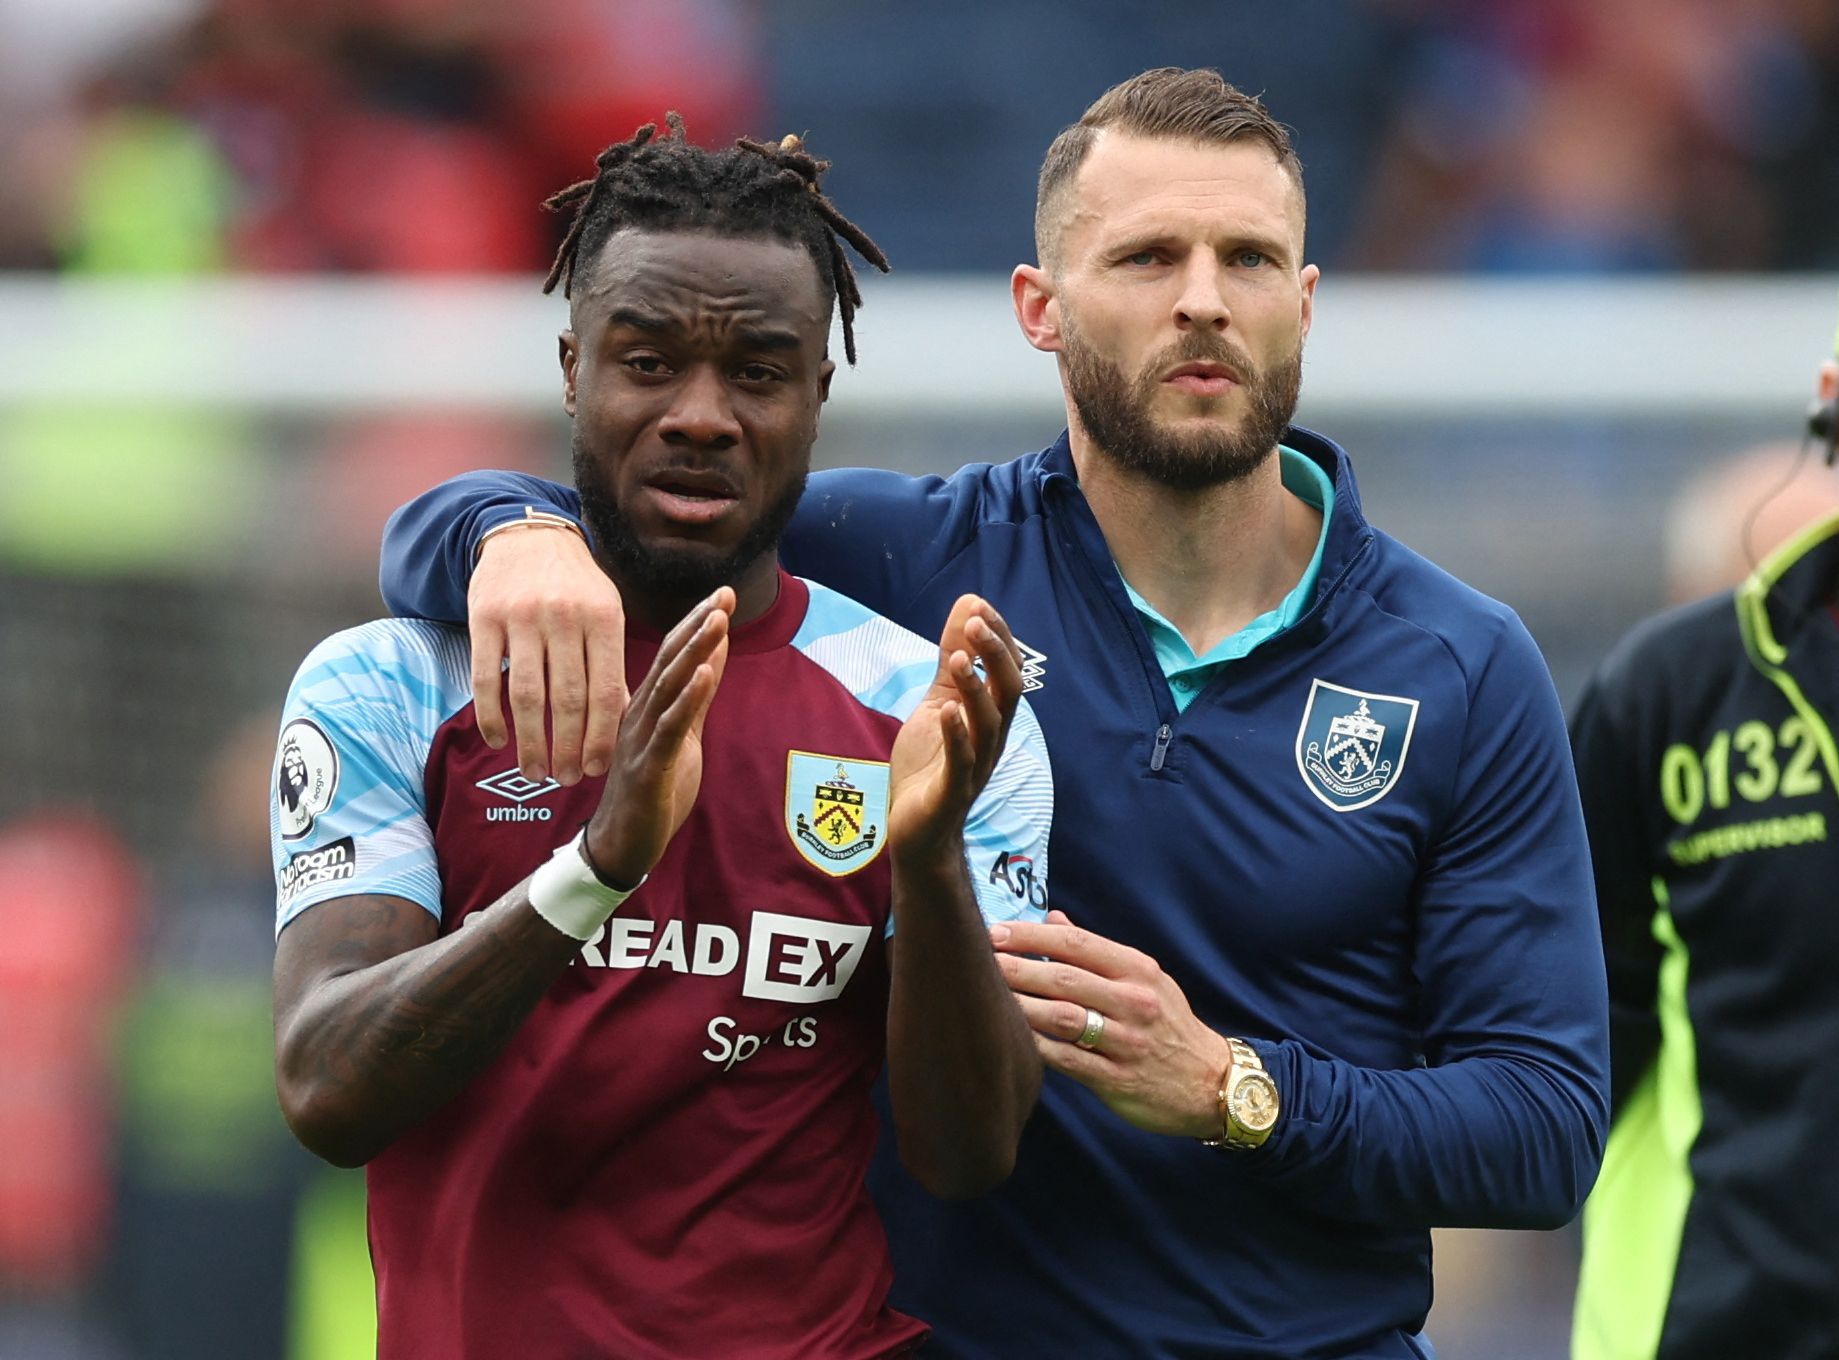 Soccer Football - Premier League - Burnley v Newcastle United - Turf Moor, Burnley, Britain - May 22, 2022 Burnley's Maxwel Cornet and Erik Pieters look dejected after losing the match and being relegated from the Premier League Action Images via Reuters/Lee Smith EDITORIAL USE ONLY. No use with unauthorized audio, video, data, fixture lists, club/league logos or 'live' services. Online in-match use limited to 75 images, no video emulation. No use in betting, games or single club /league/player 